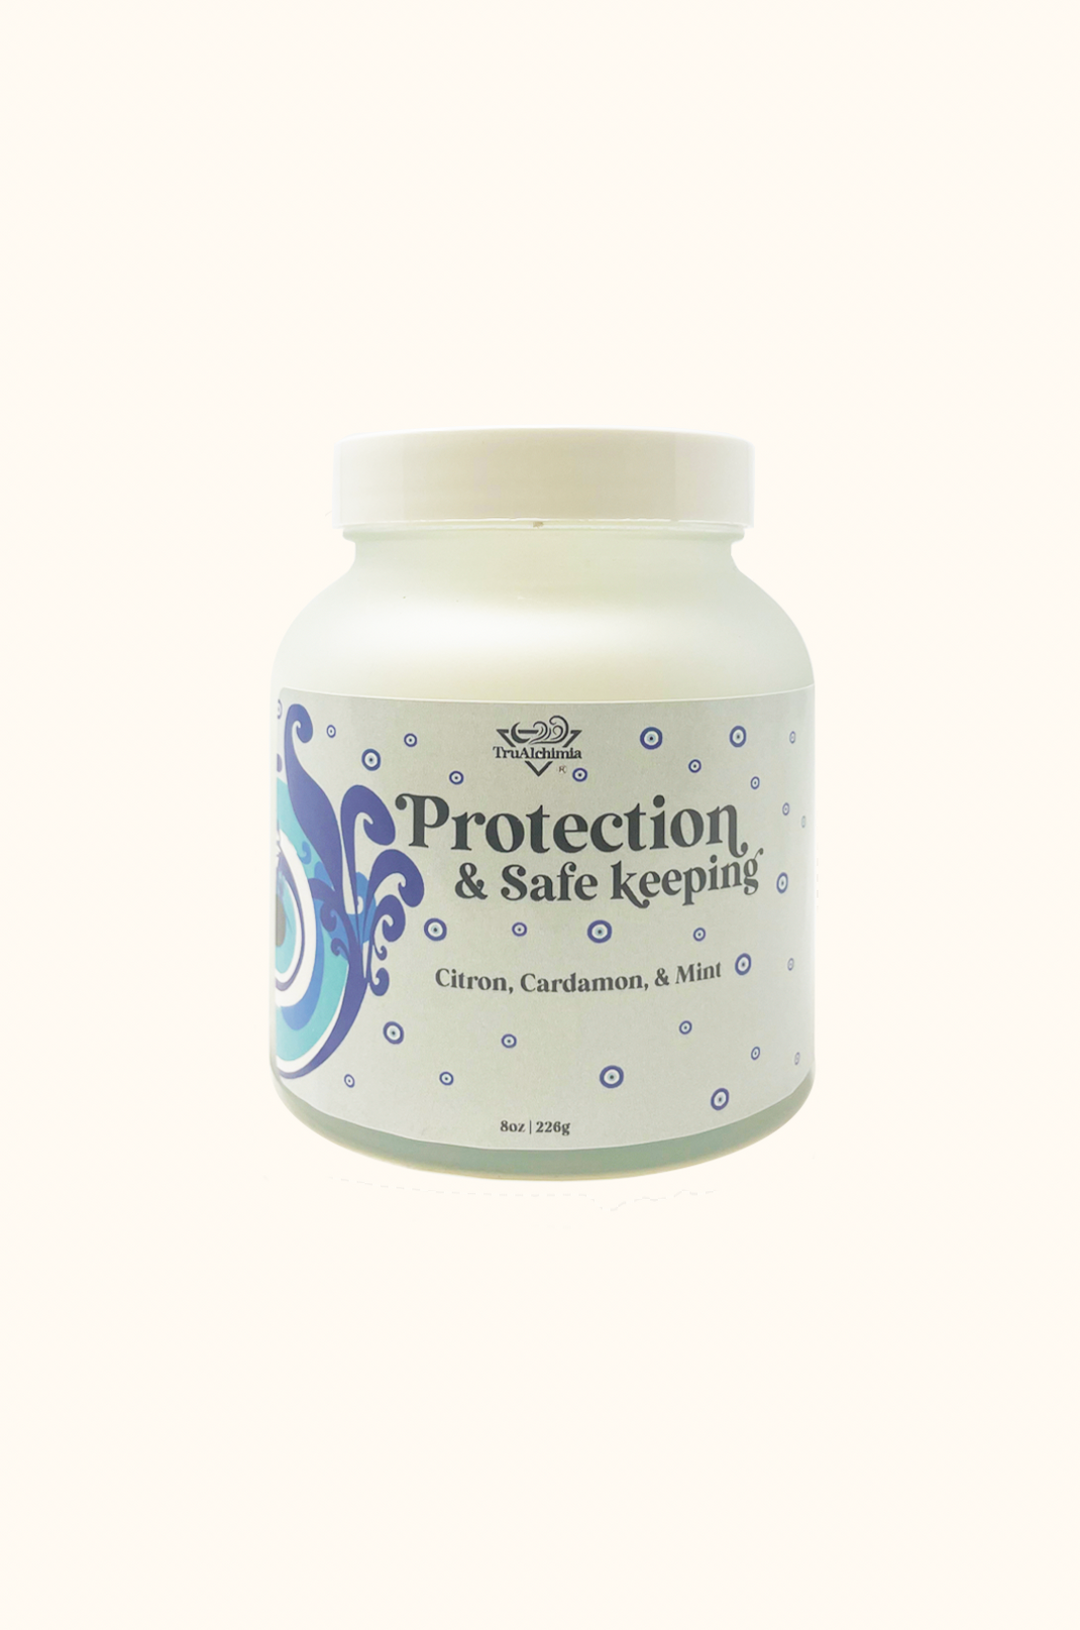 Protection & Safe Keeping Candle